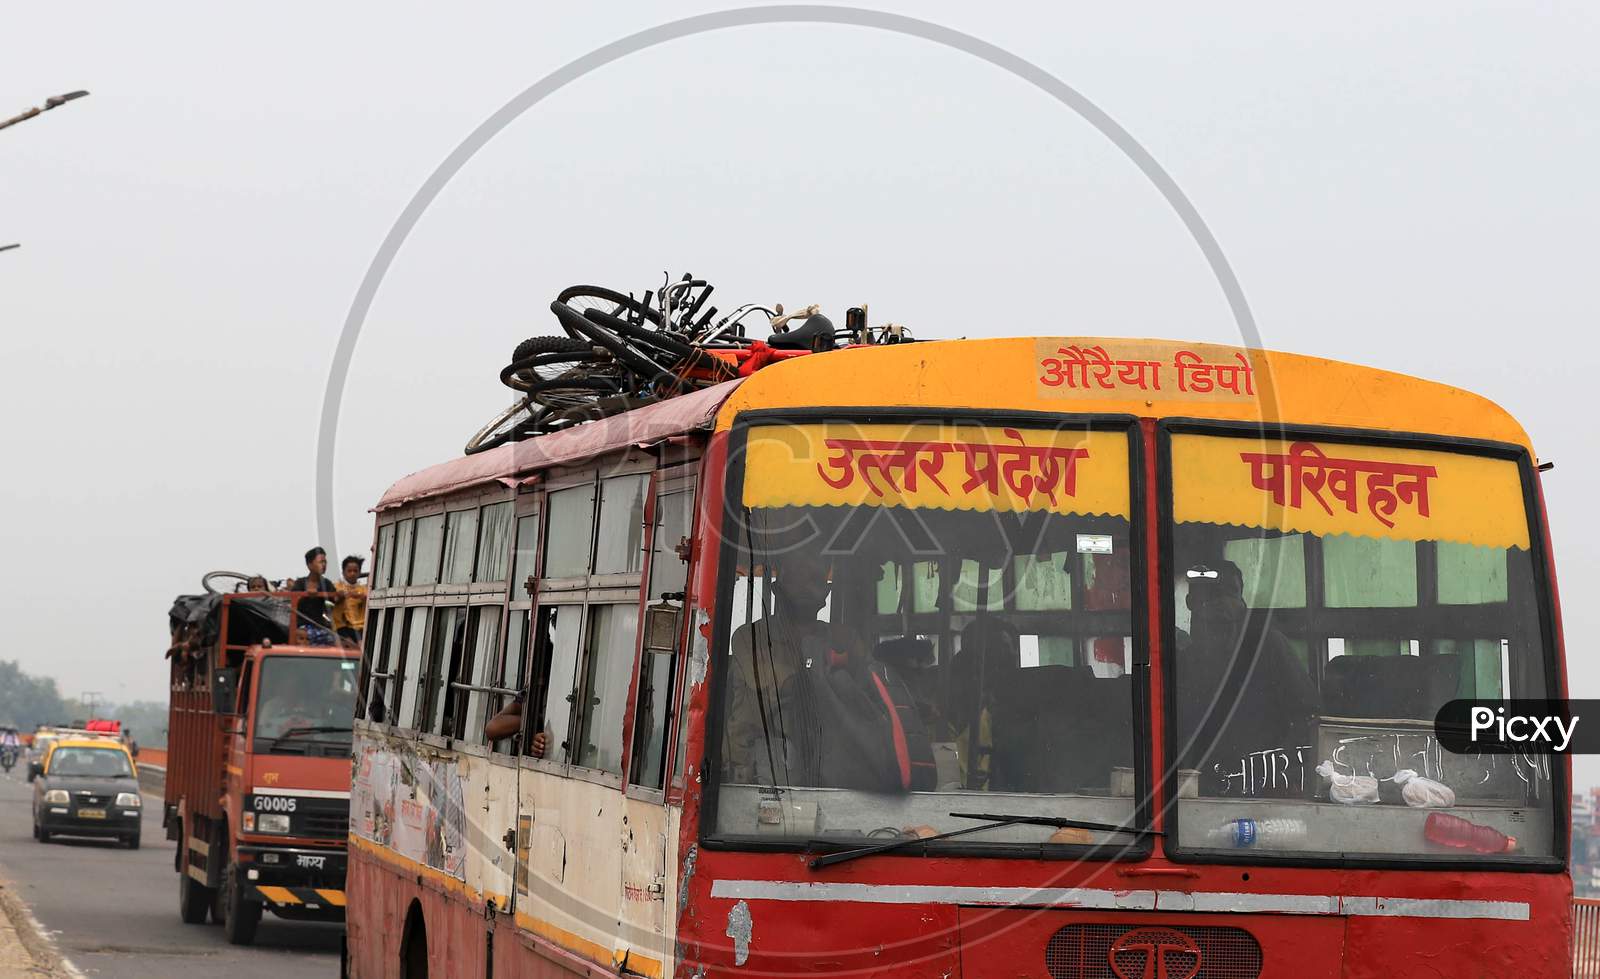 Buses From Mumbai Carrying  Migrant Workers  To Their Native Places During Nationwide Lockdown Amidst Coronavirus Or COVID-19 Pandemic In Prayagraj  May 14 2020